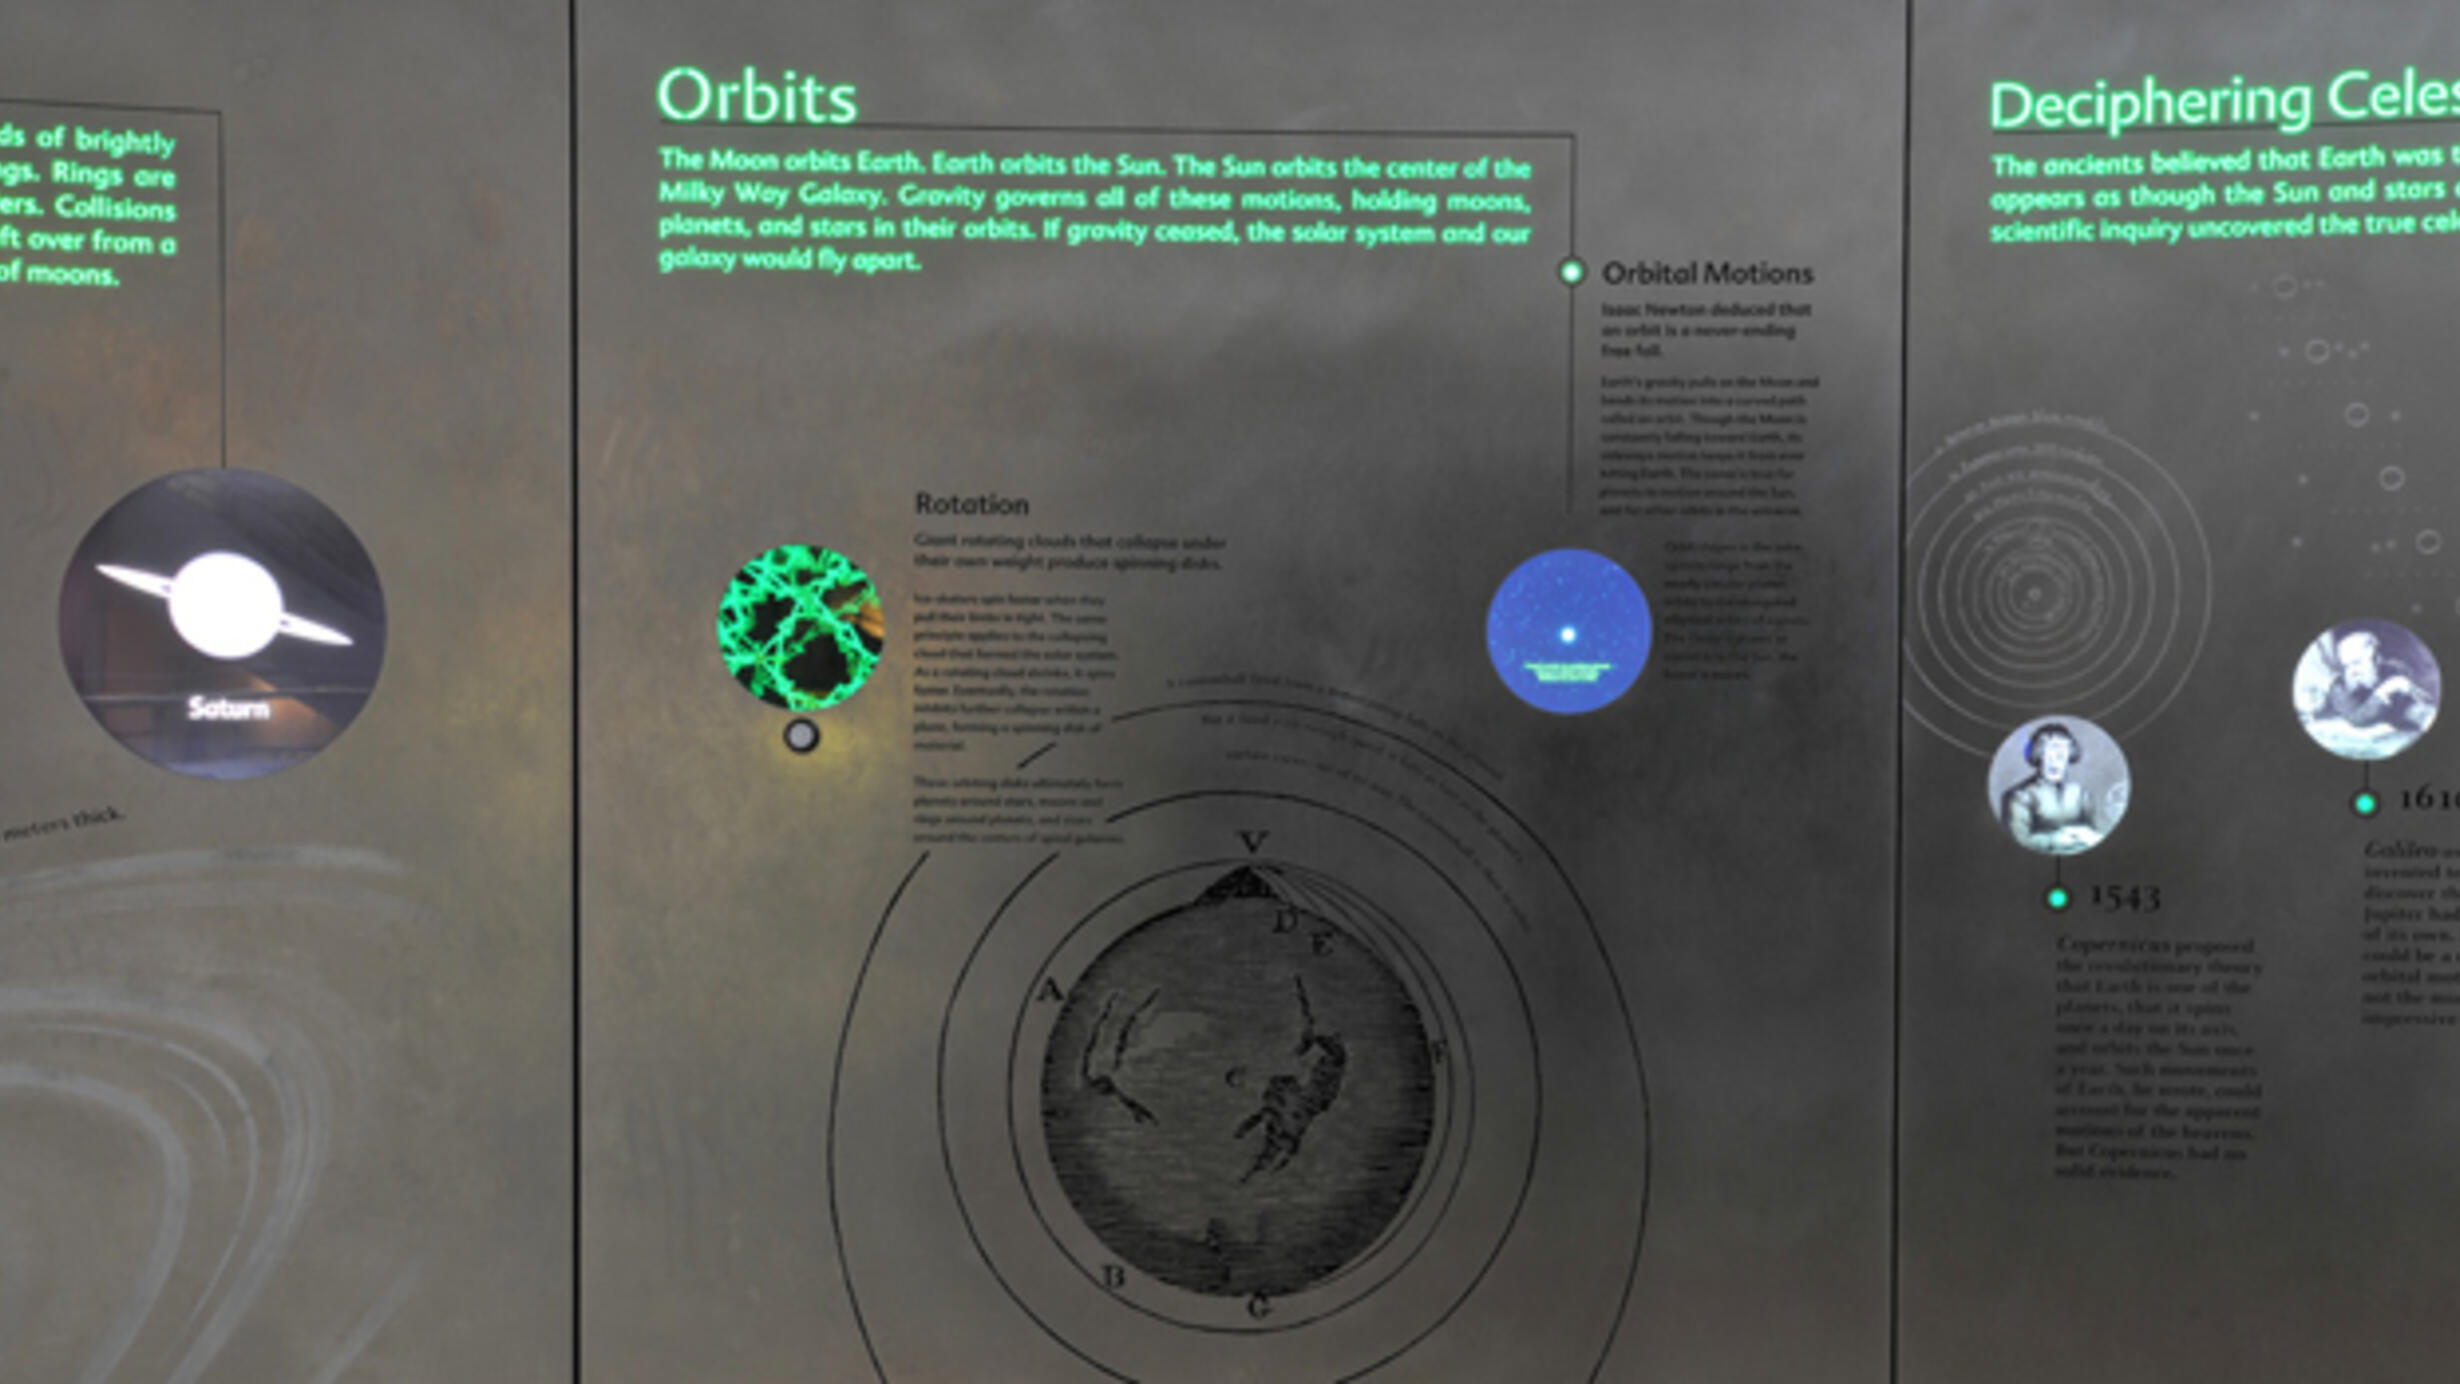 A visualization of the orbits of the Earth, moon, and sun on an exhibition wall in the Hall of the Universe.